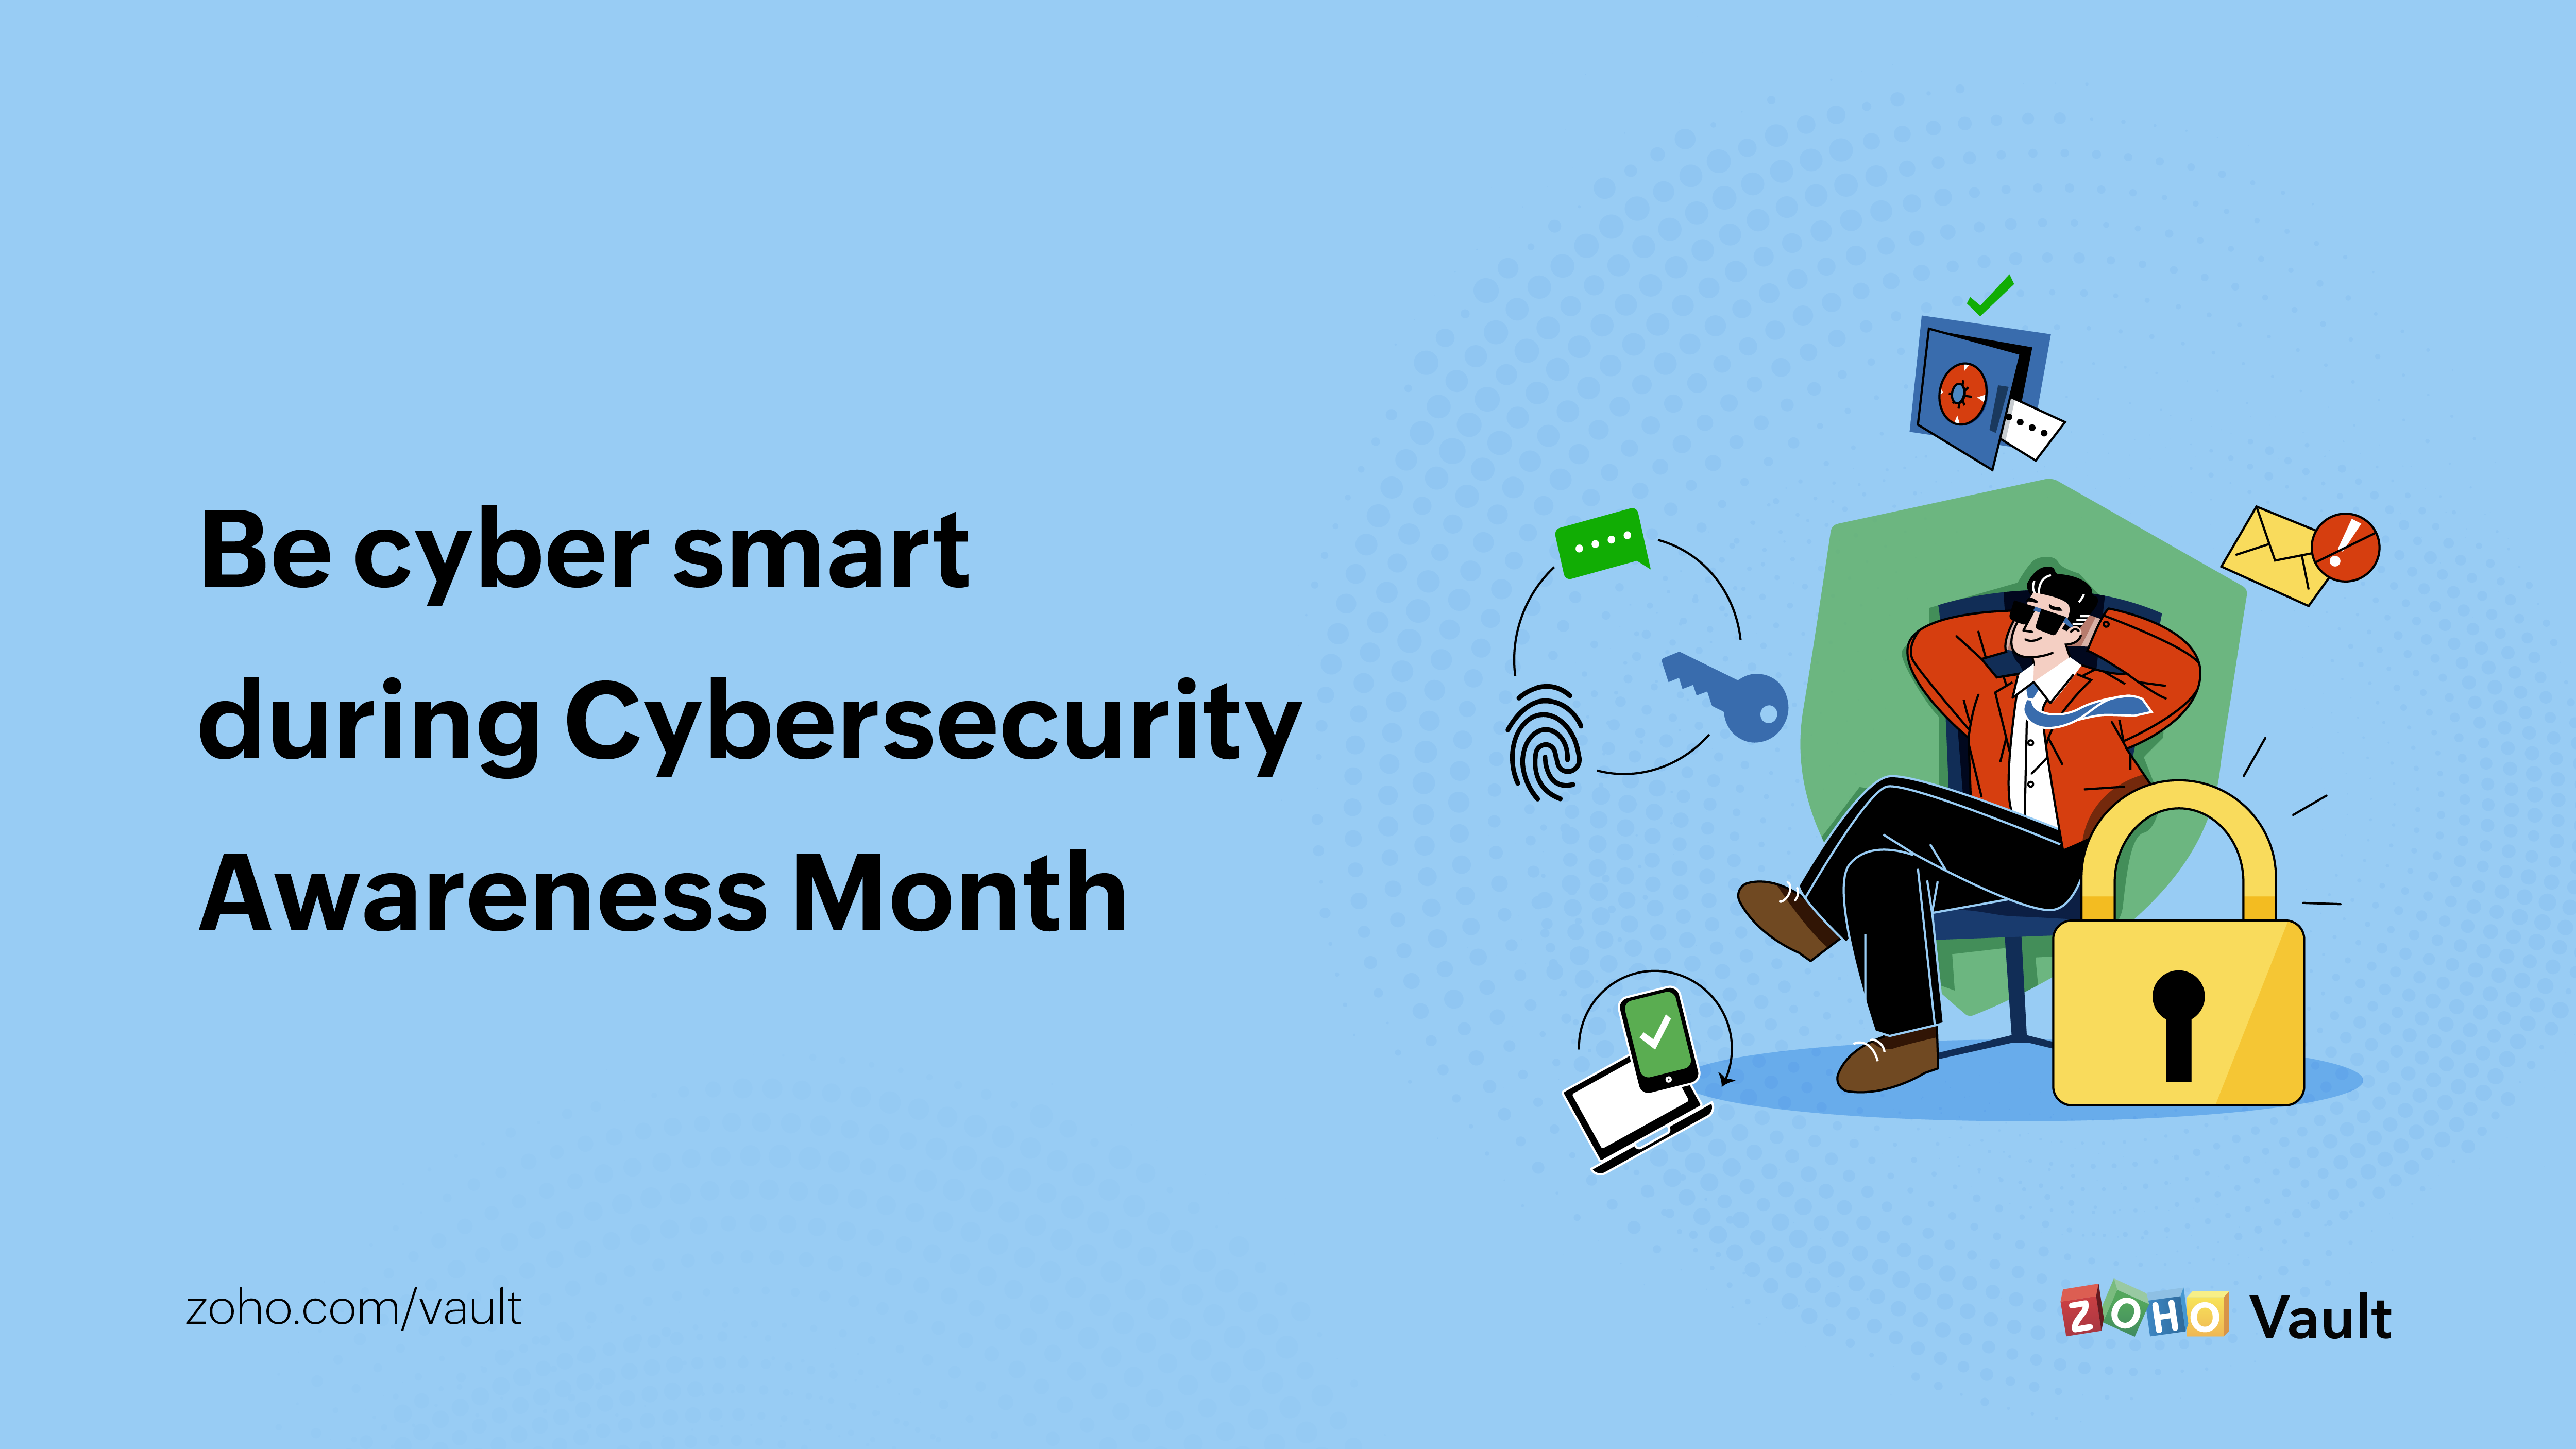 Be cyber smart during Cybersecurity Awareness Month